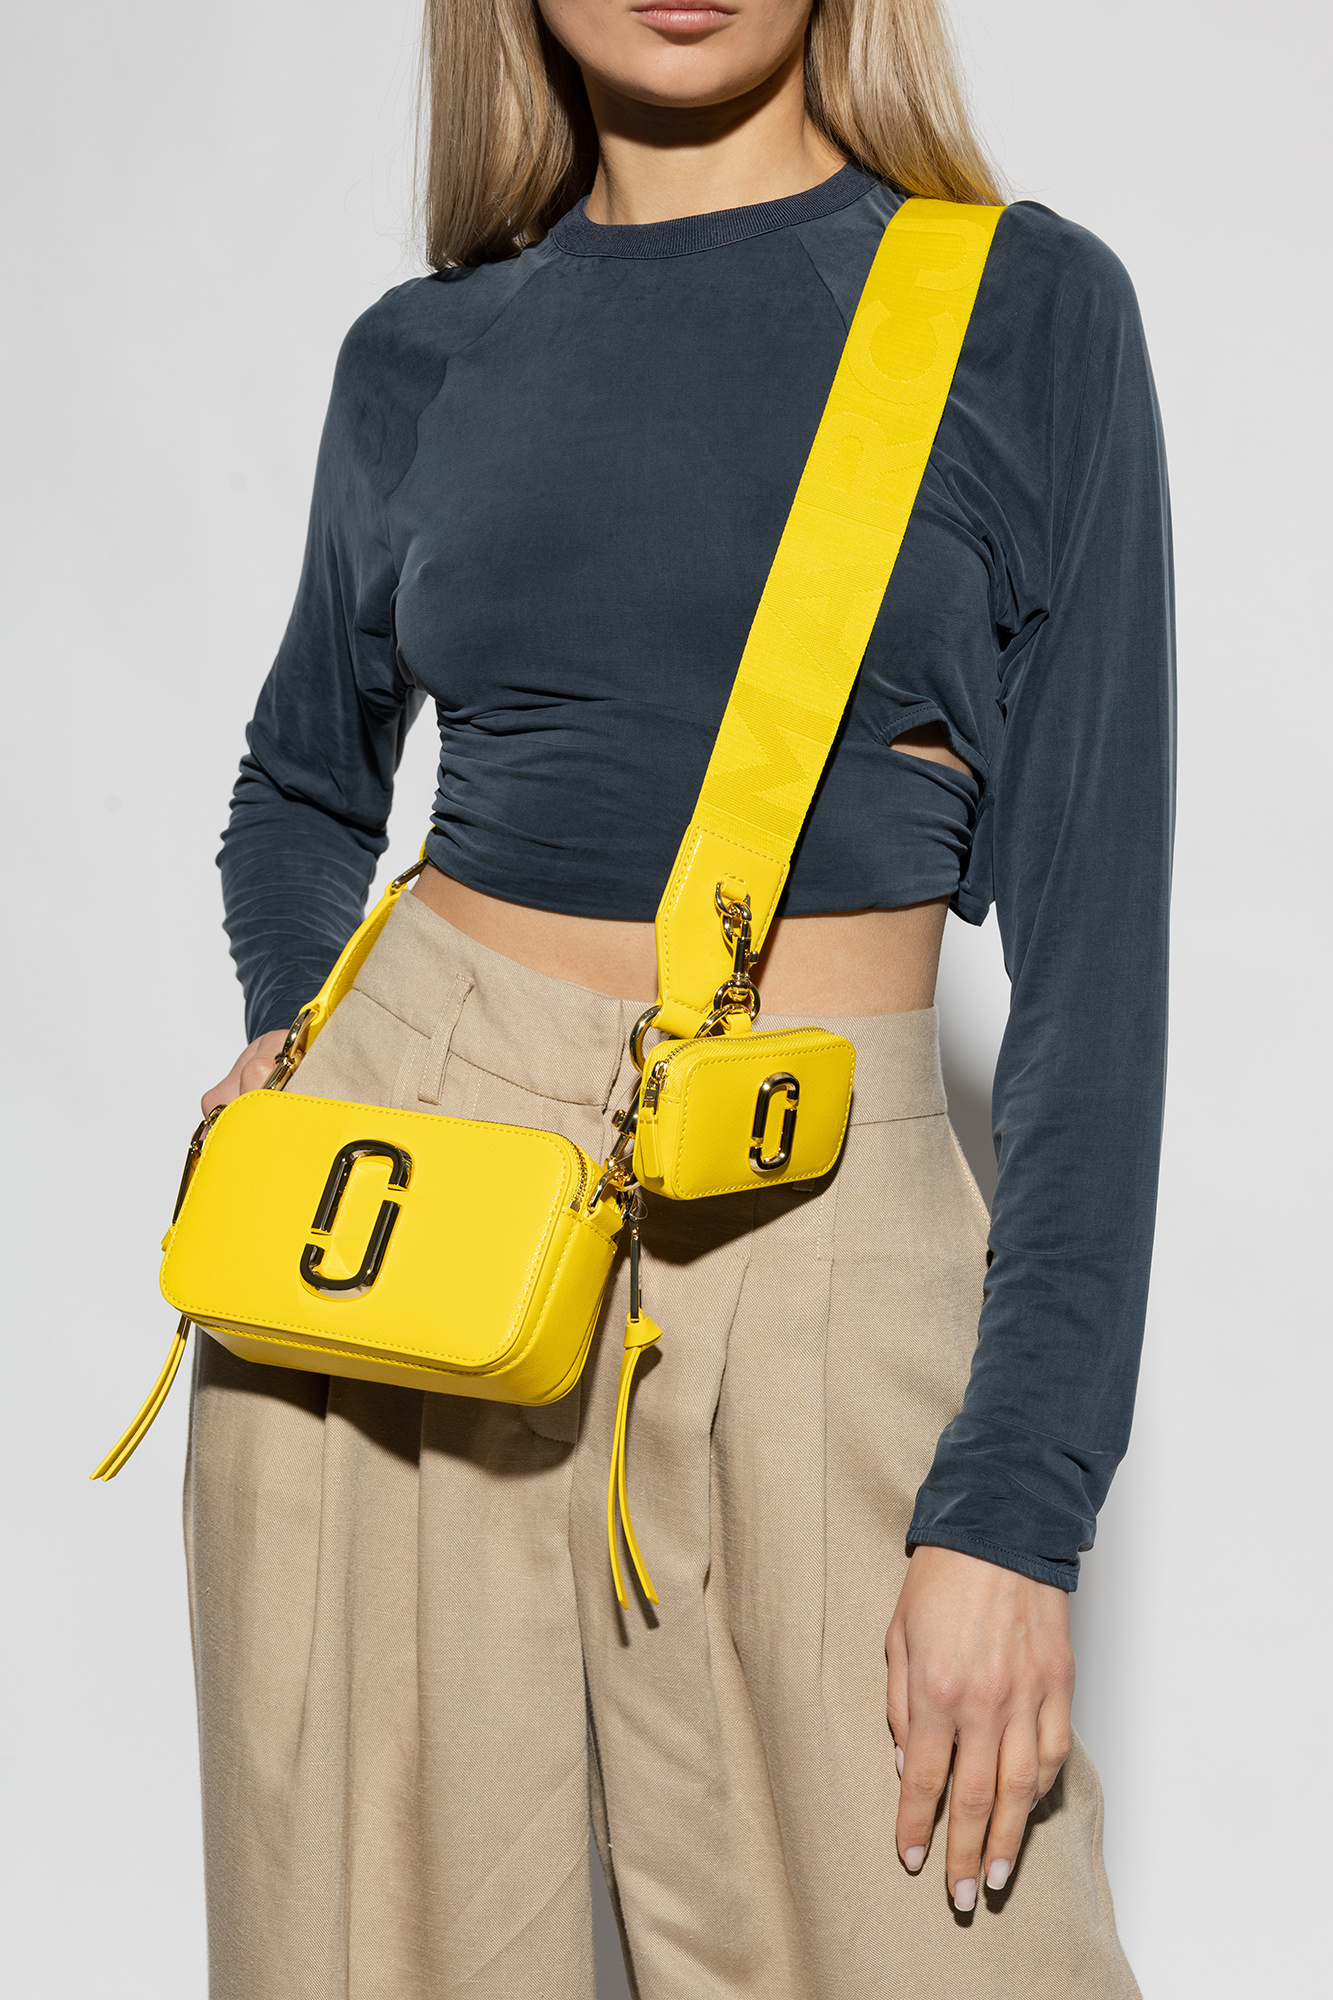 Marc Jacobs The Utility Snapshot Bag in Yellow